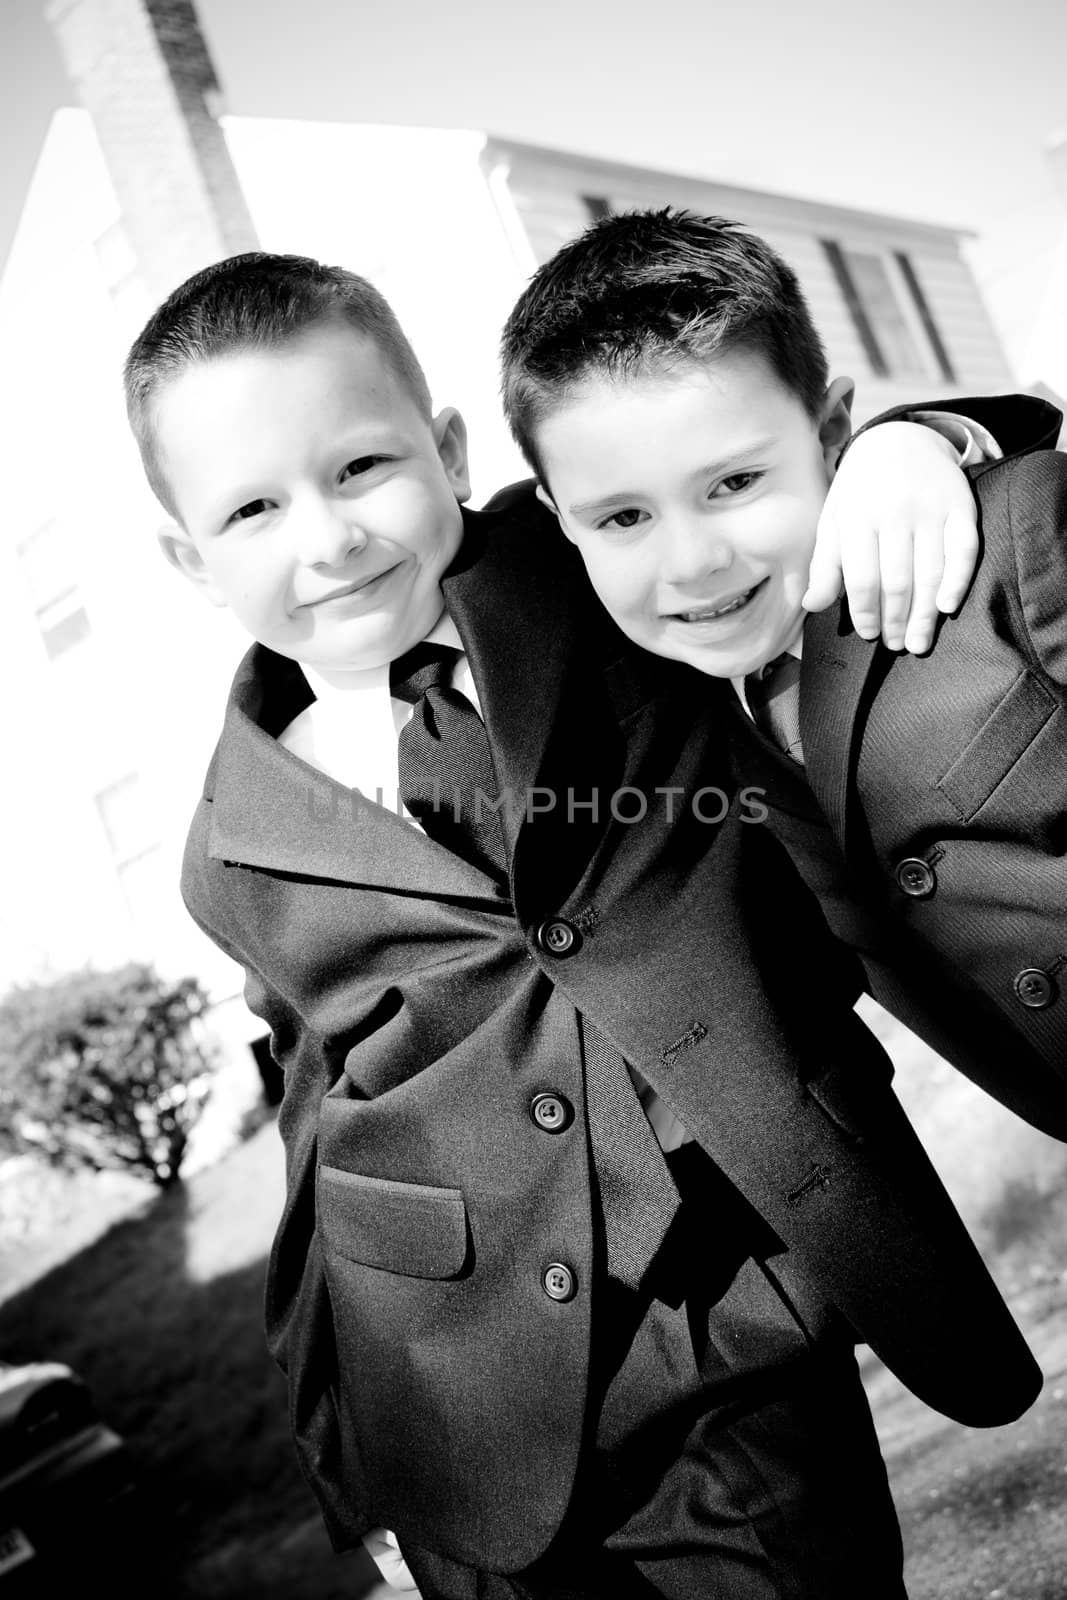 Two happy young boys dressed in suits with smiles on their faces.  Black and white.